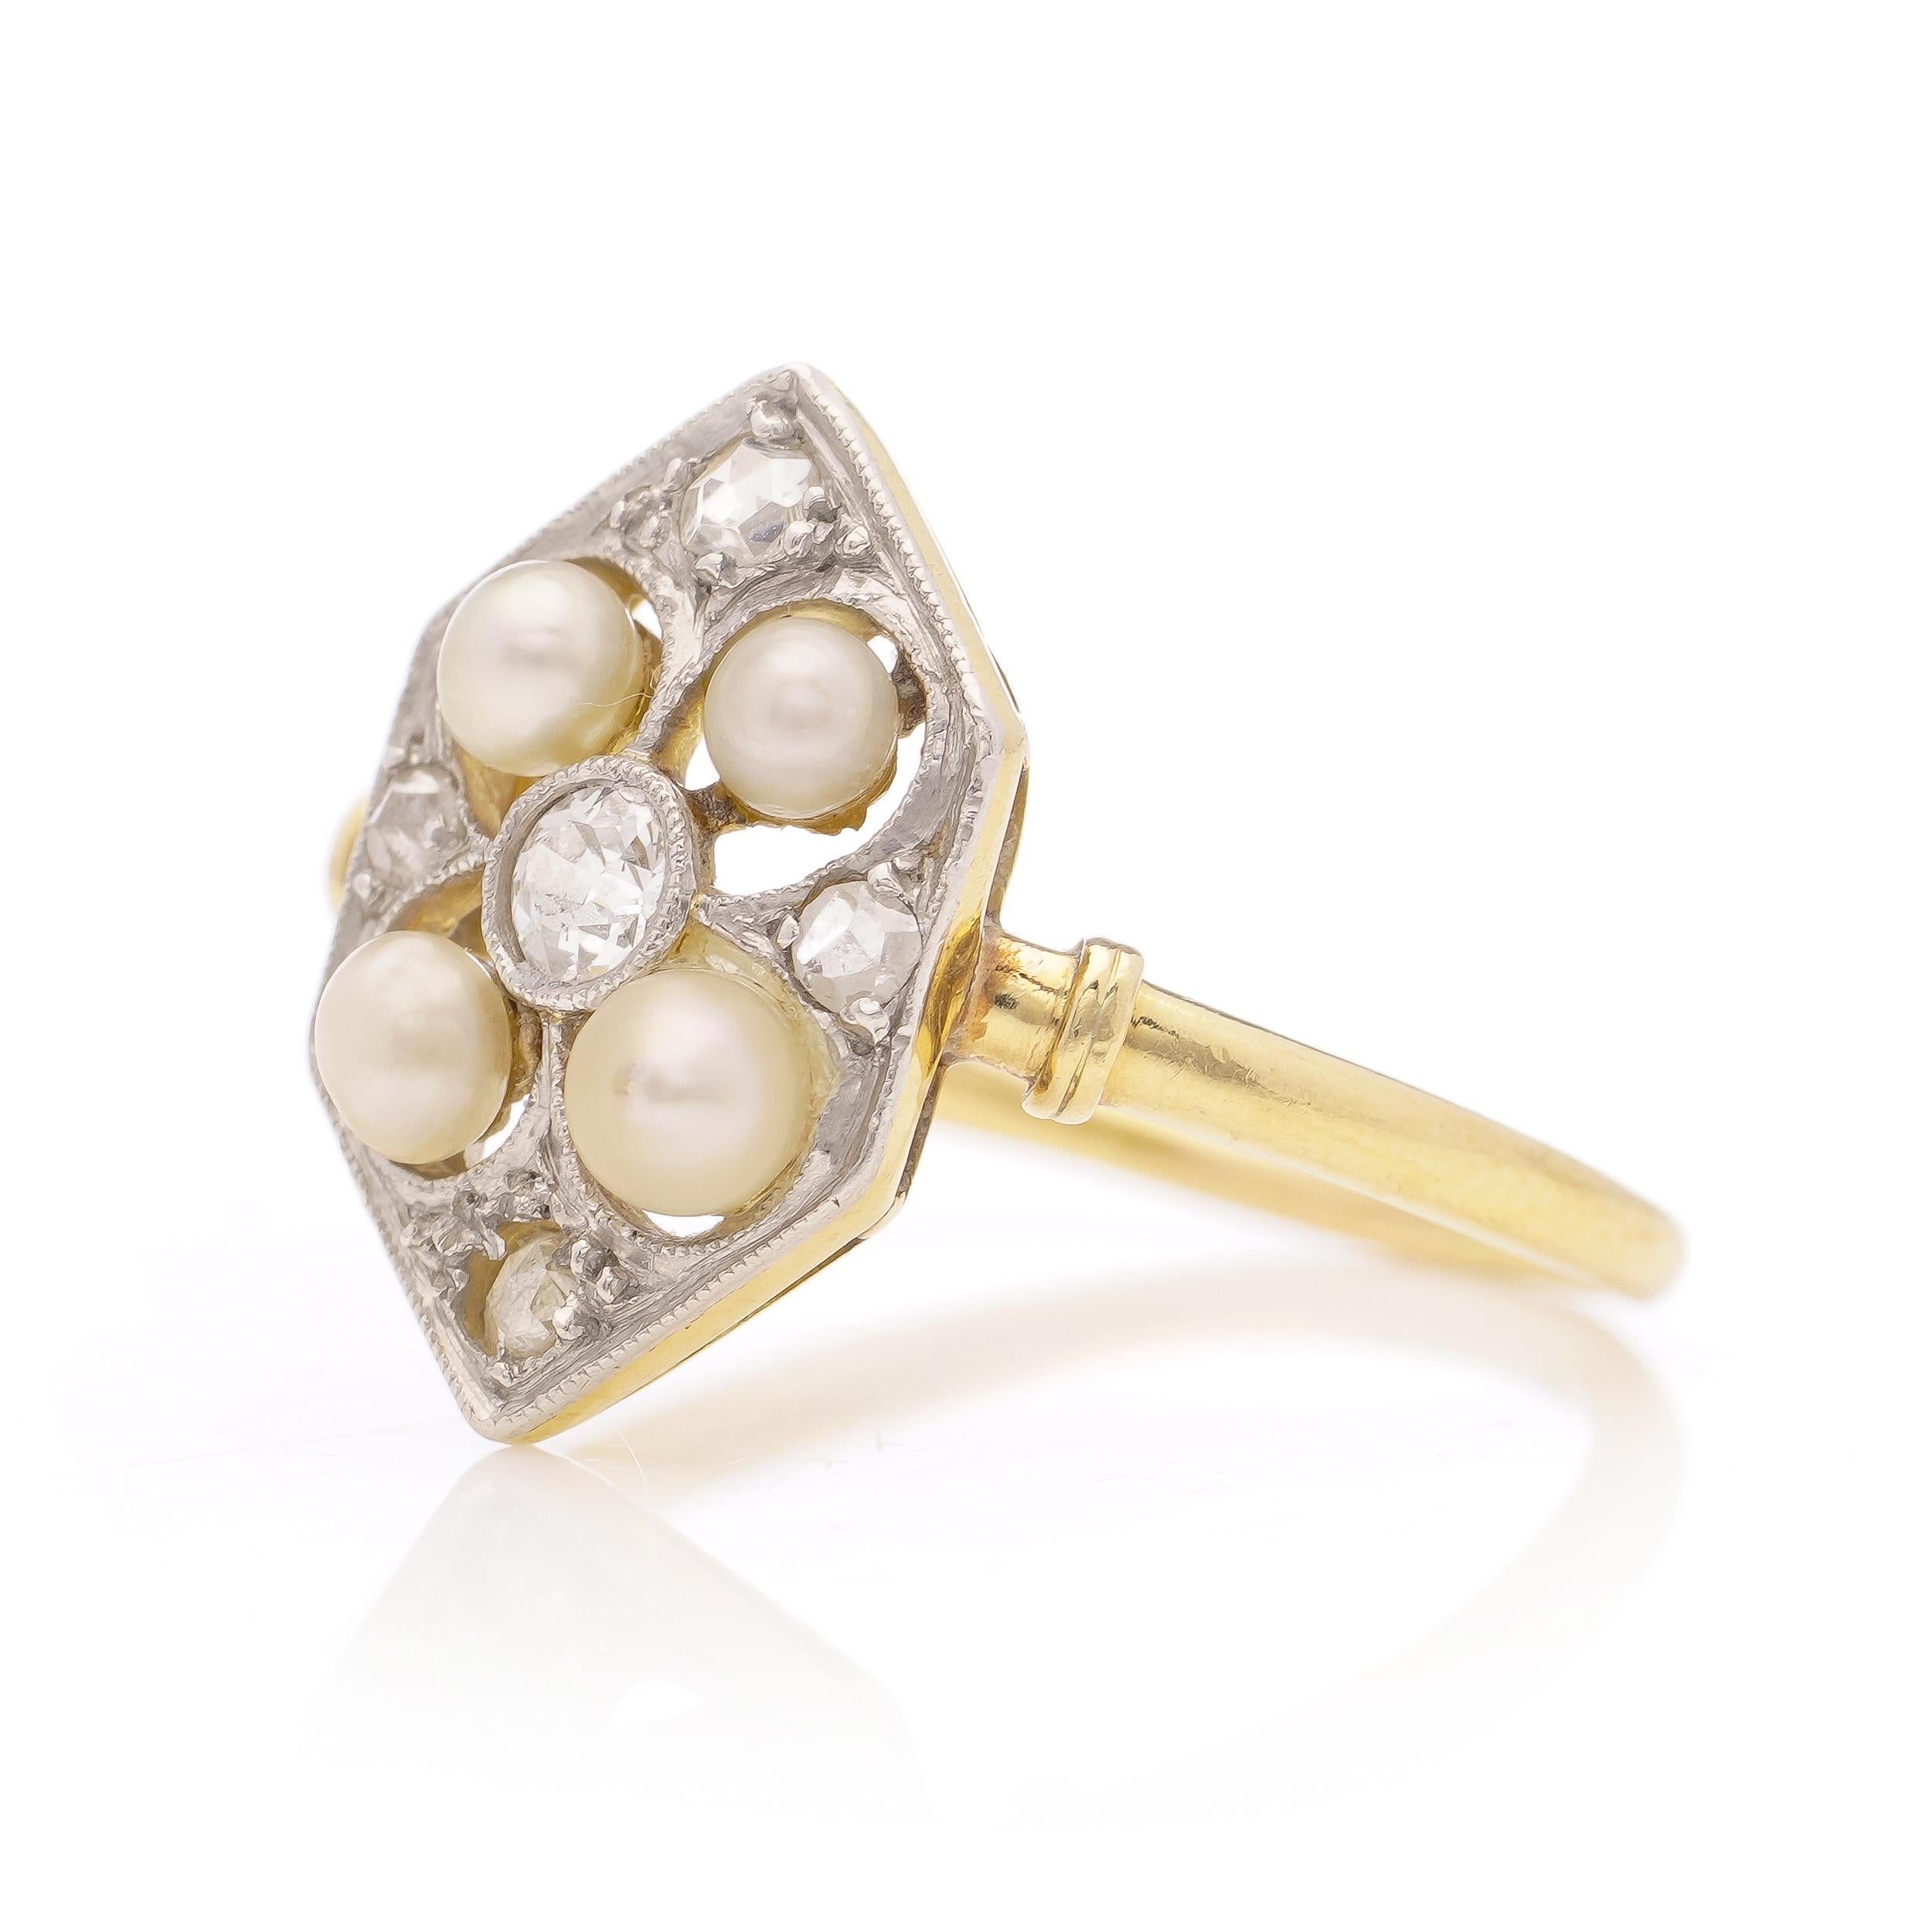 Edwardian 18kt yellow gold and platinum ladies' ring with diamonds and pearls  For Sale 1